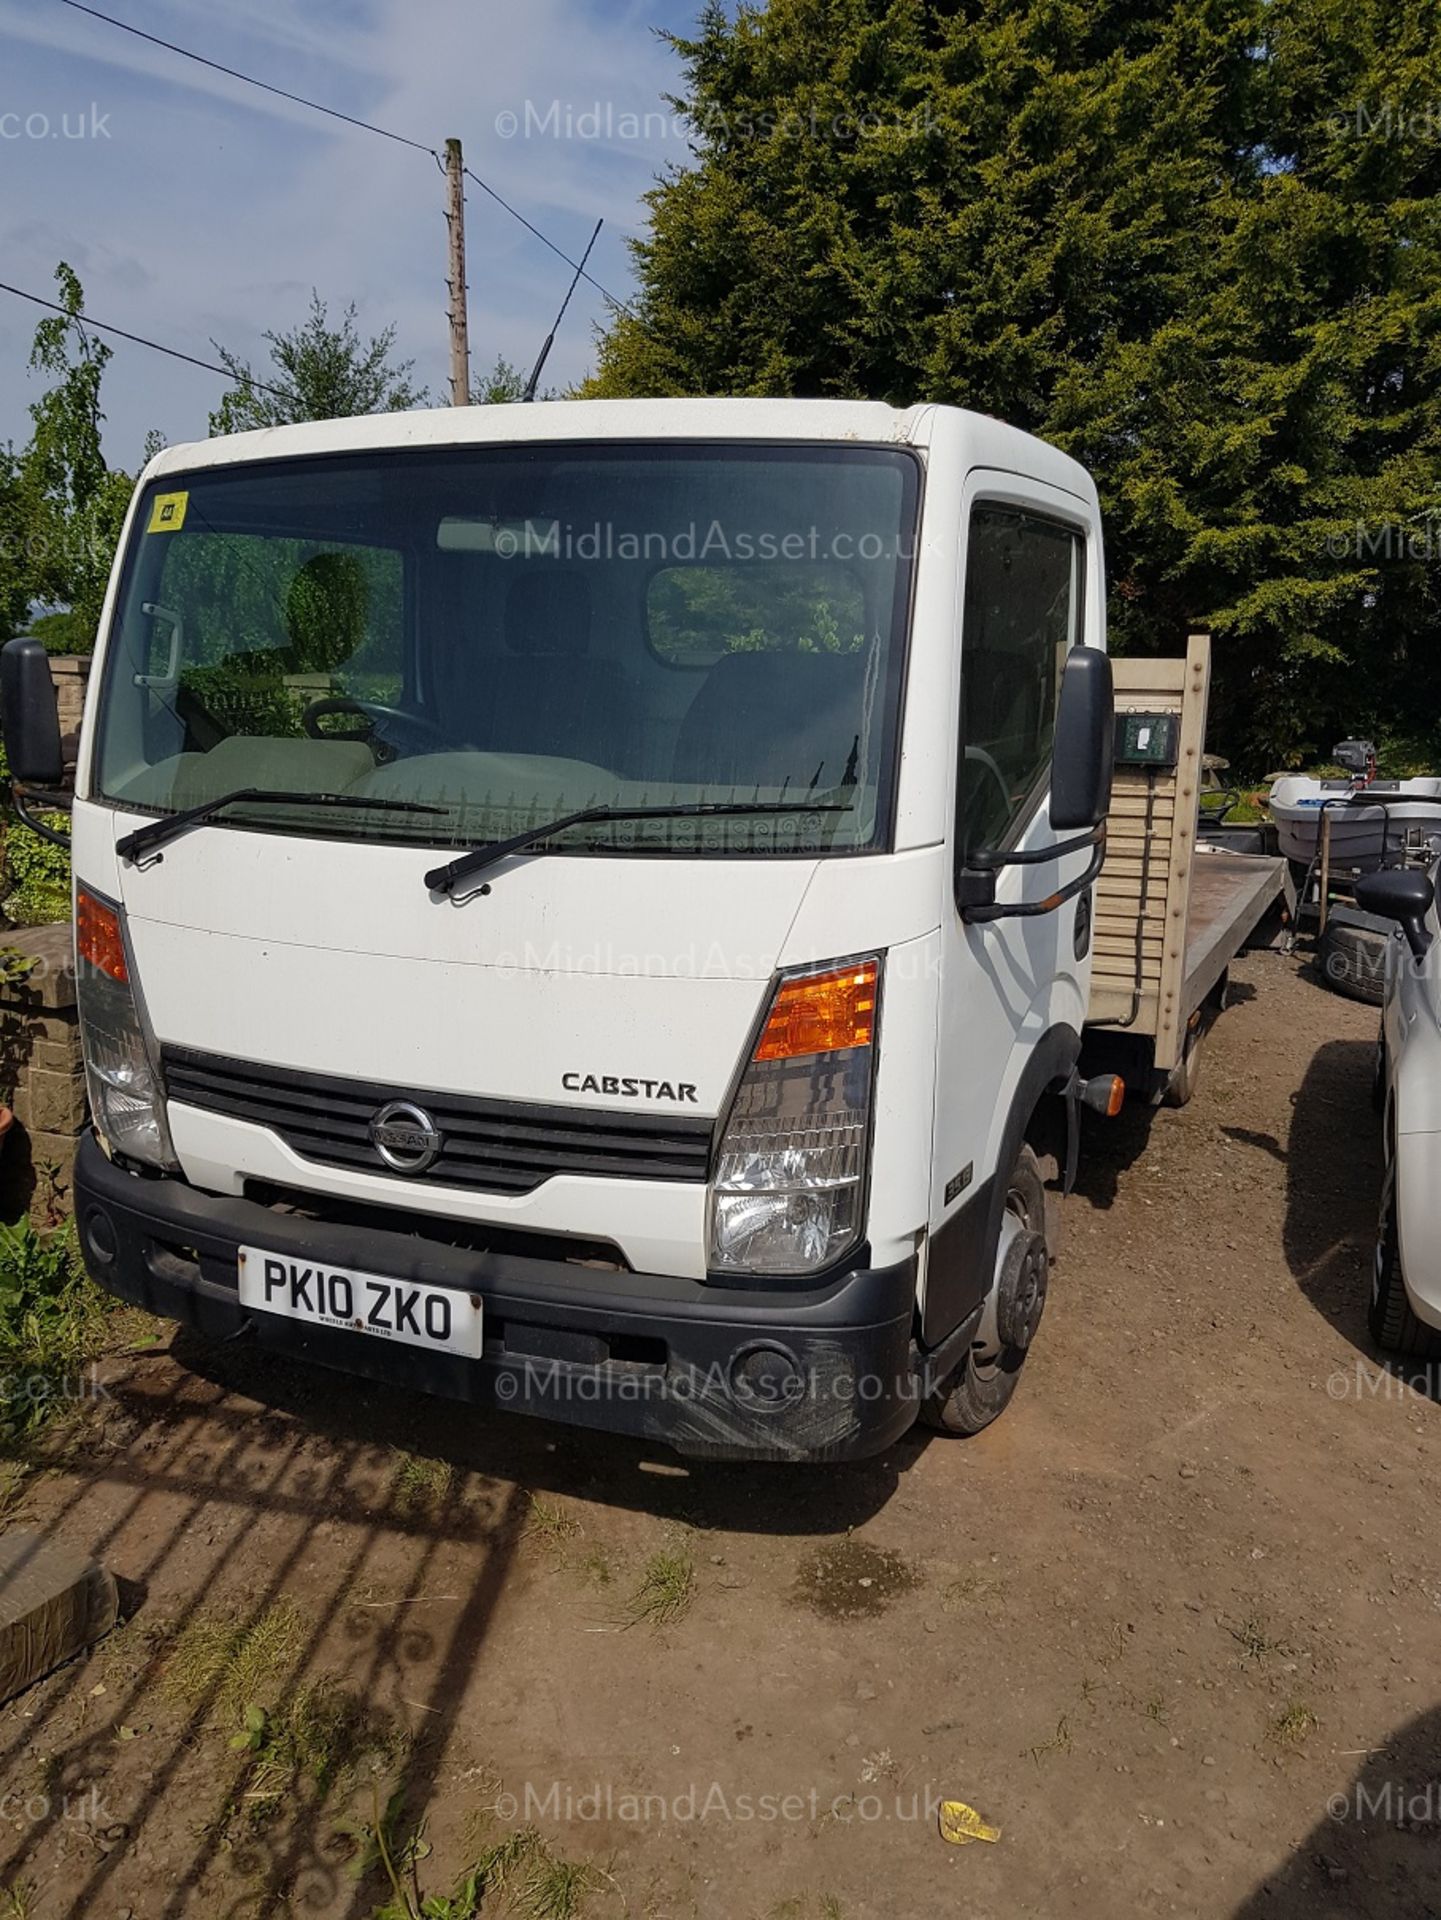 2010/10 REG NISSAN CABSTAR 35.13 S/C MWB WHITE DIESEL RECOVERY WITH WINCH 3500KG *PLUS VAT*